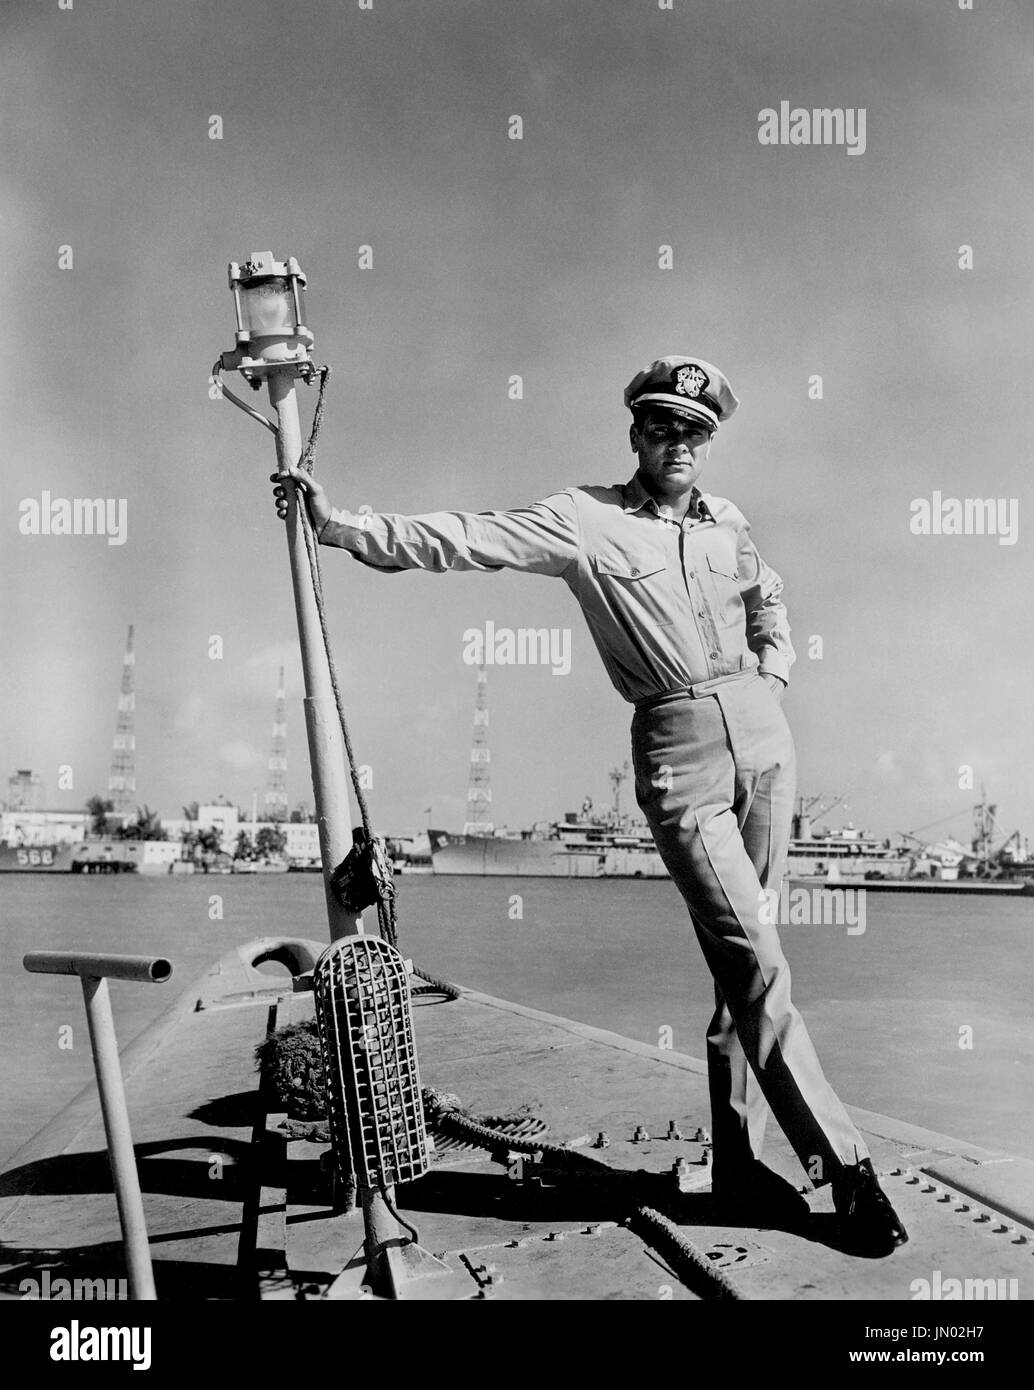 Tony Curtis, on-set of the Film, "Operation Petticoat", Universal Pictures, 1959 Stock Photo